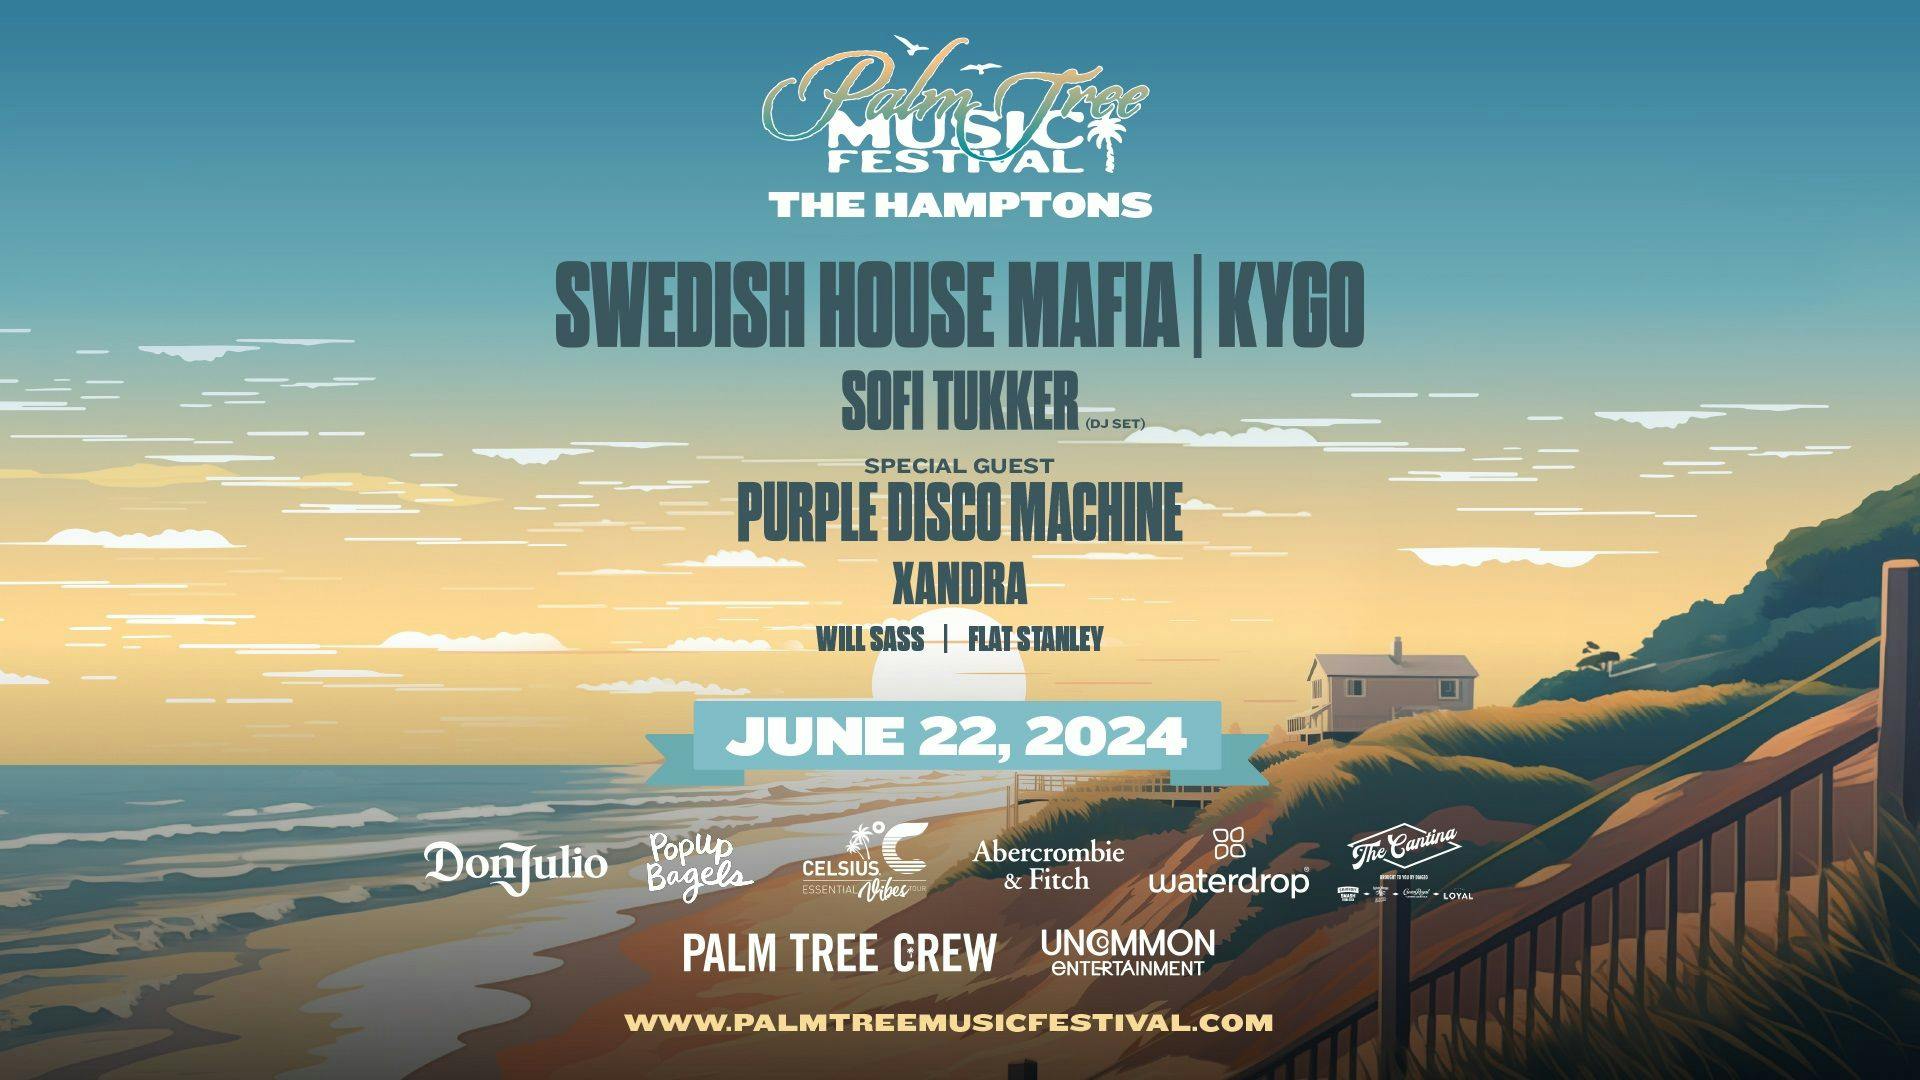 Palm Tree Music Festival in the Hamptons